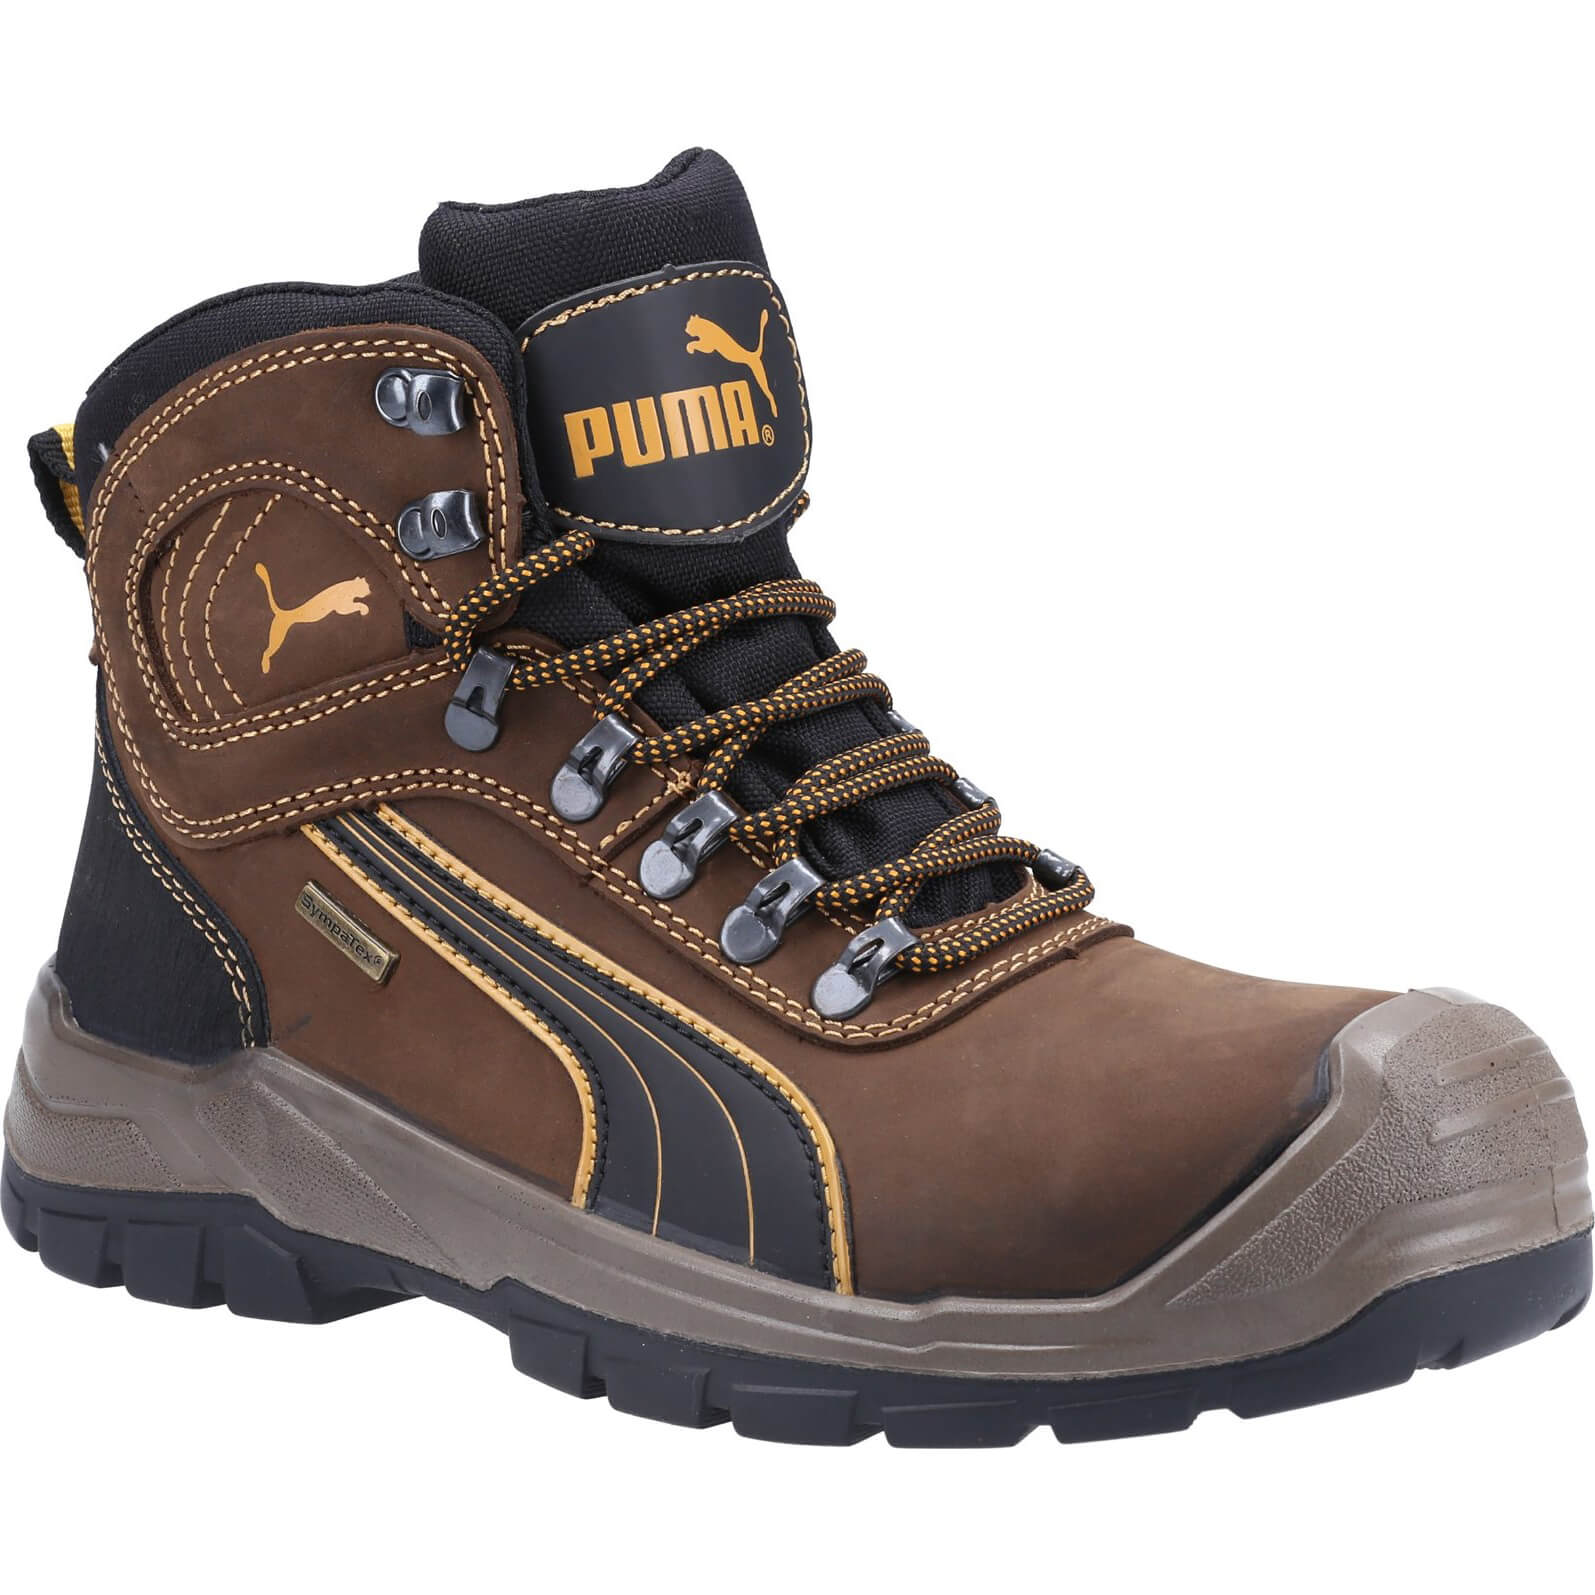 Image of Puma Mens Sierra Nevada Mid Safety Boots Brown Size 13